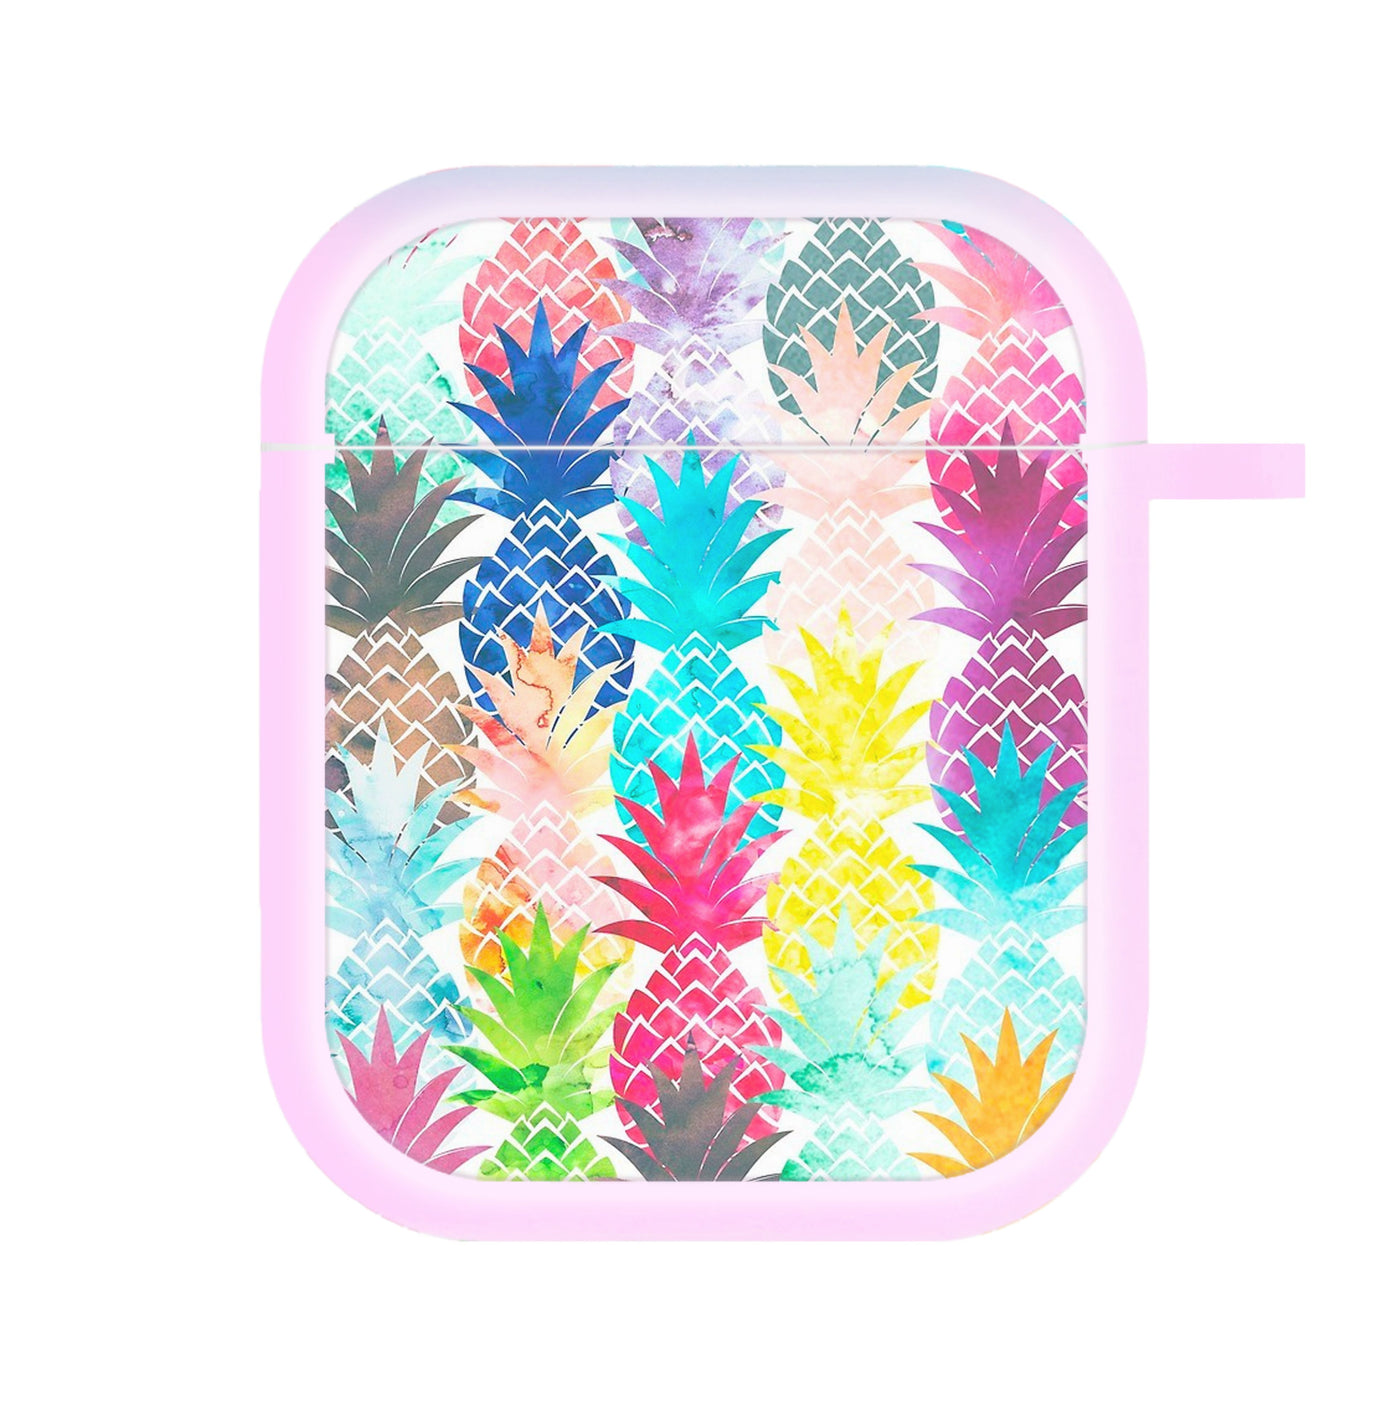 Watercolour Pineapple Pattern AirPods Case